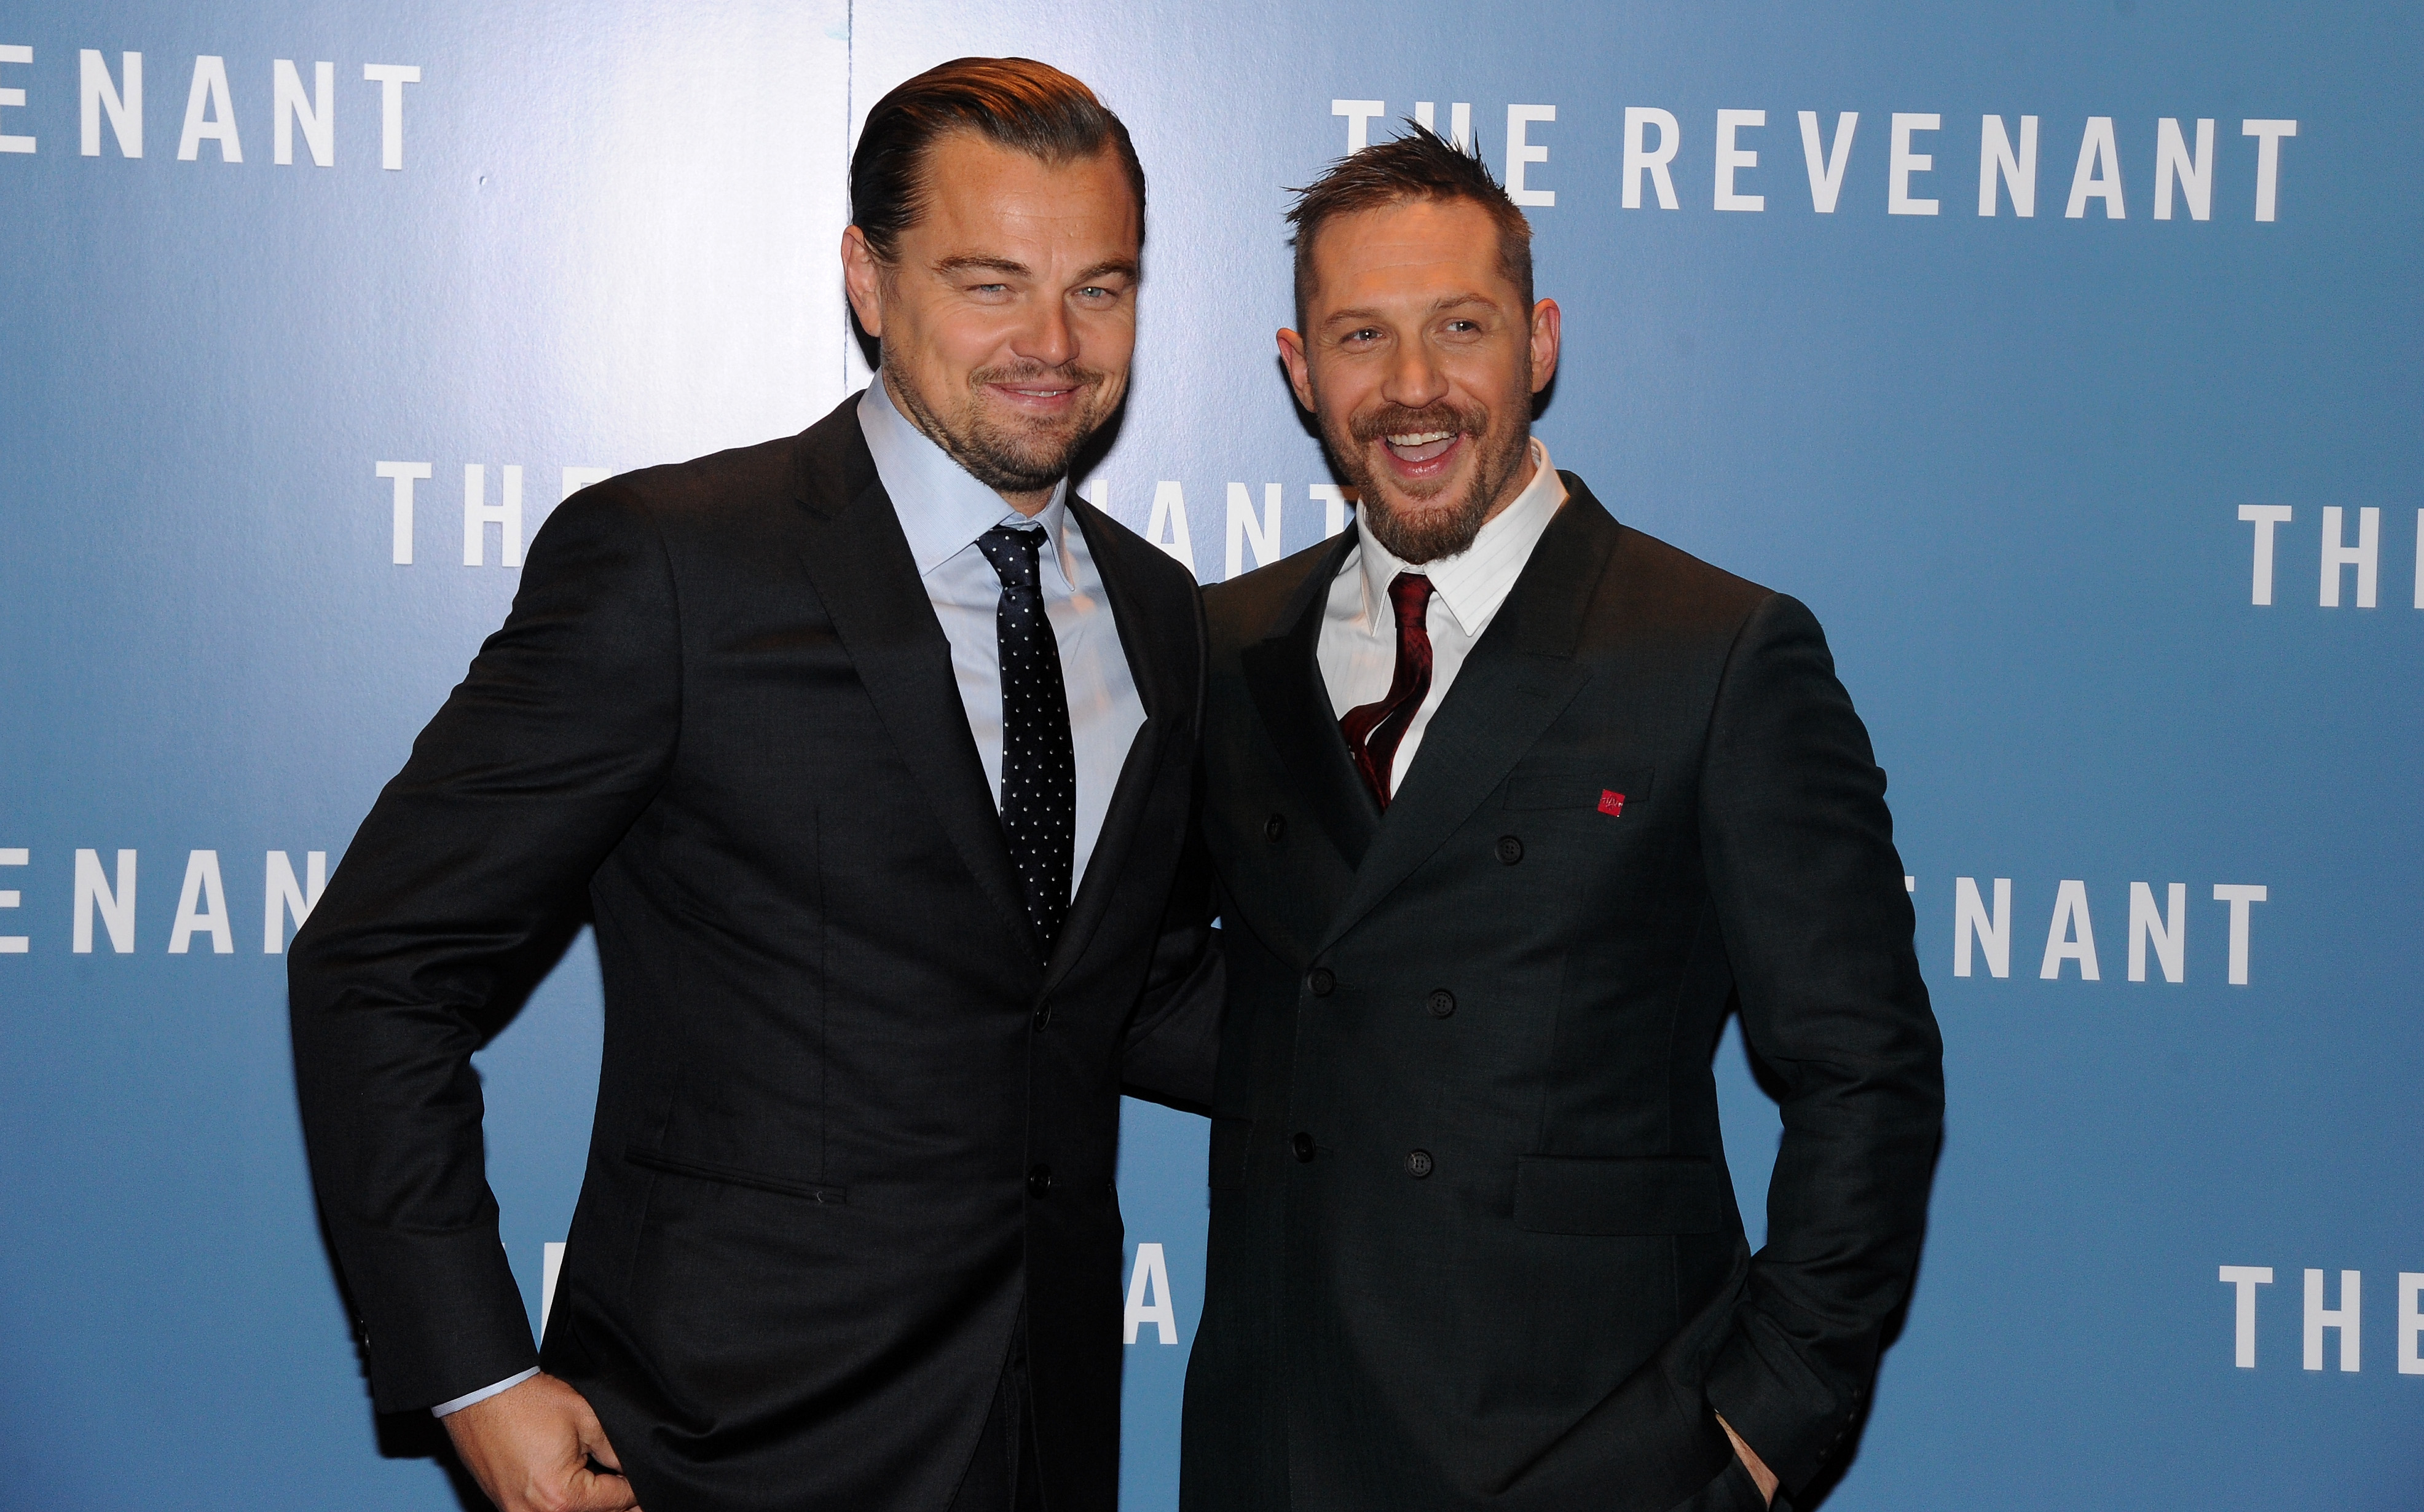 Leonardo DiCaprio (L) and Tom Hardy attend UK Premiere of "The Revenant" at Empire Leicester Square on January 14, 2016 in London, England. (Dave J Hogan&mdash;Getty Images)